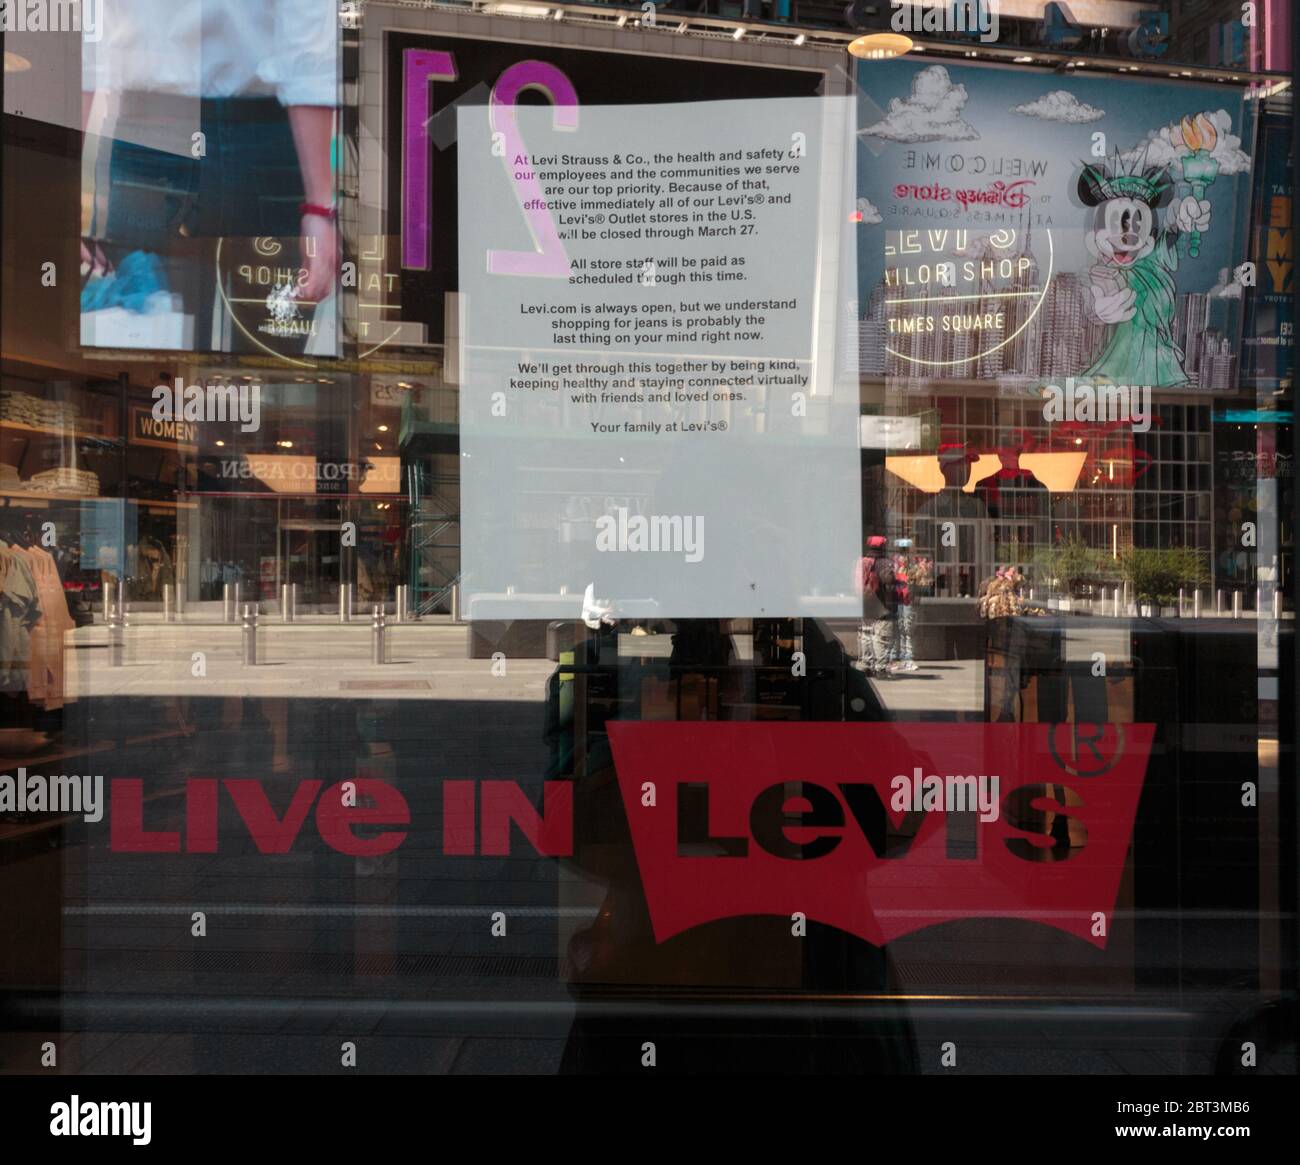 sign at a Levi's store in Times Square stating it is closed due to the coronavirus or covid-19 pandemic and they are paying their staff through it Stock Photo